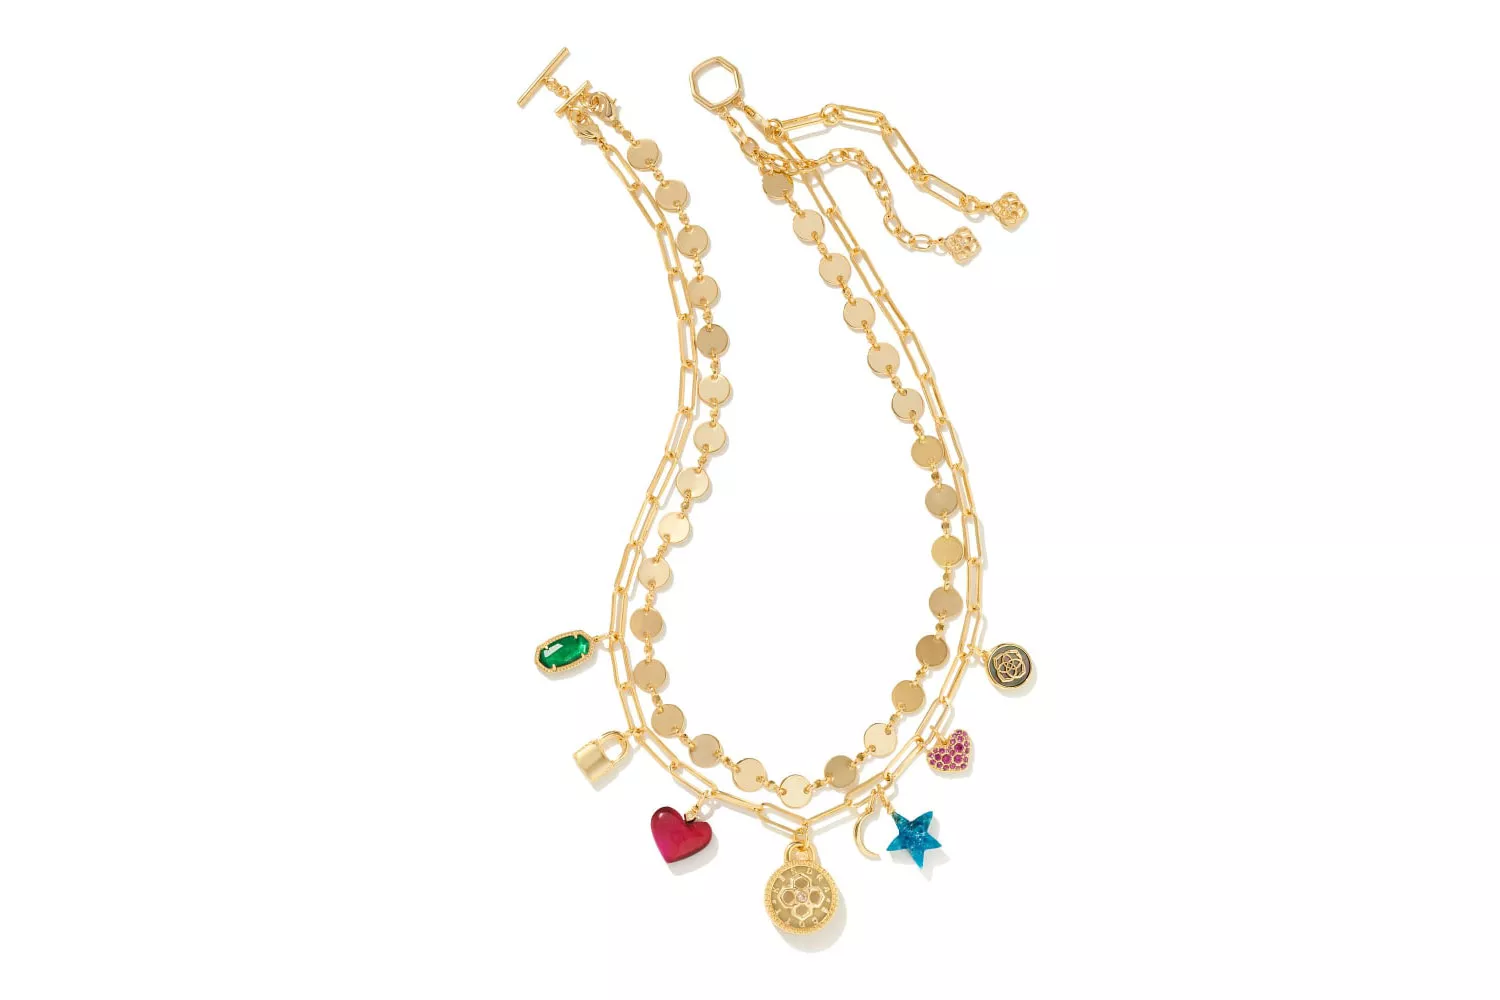 Kendra Scott Frankie Convertible Gold Crystal Charm Necklace in Multi Mix